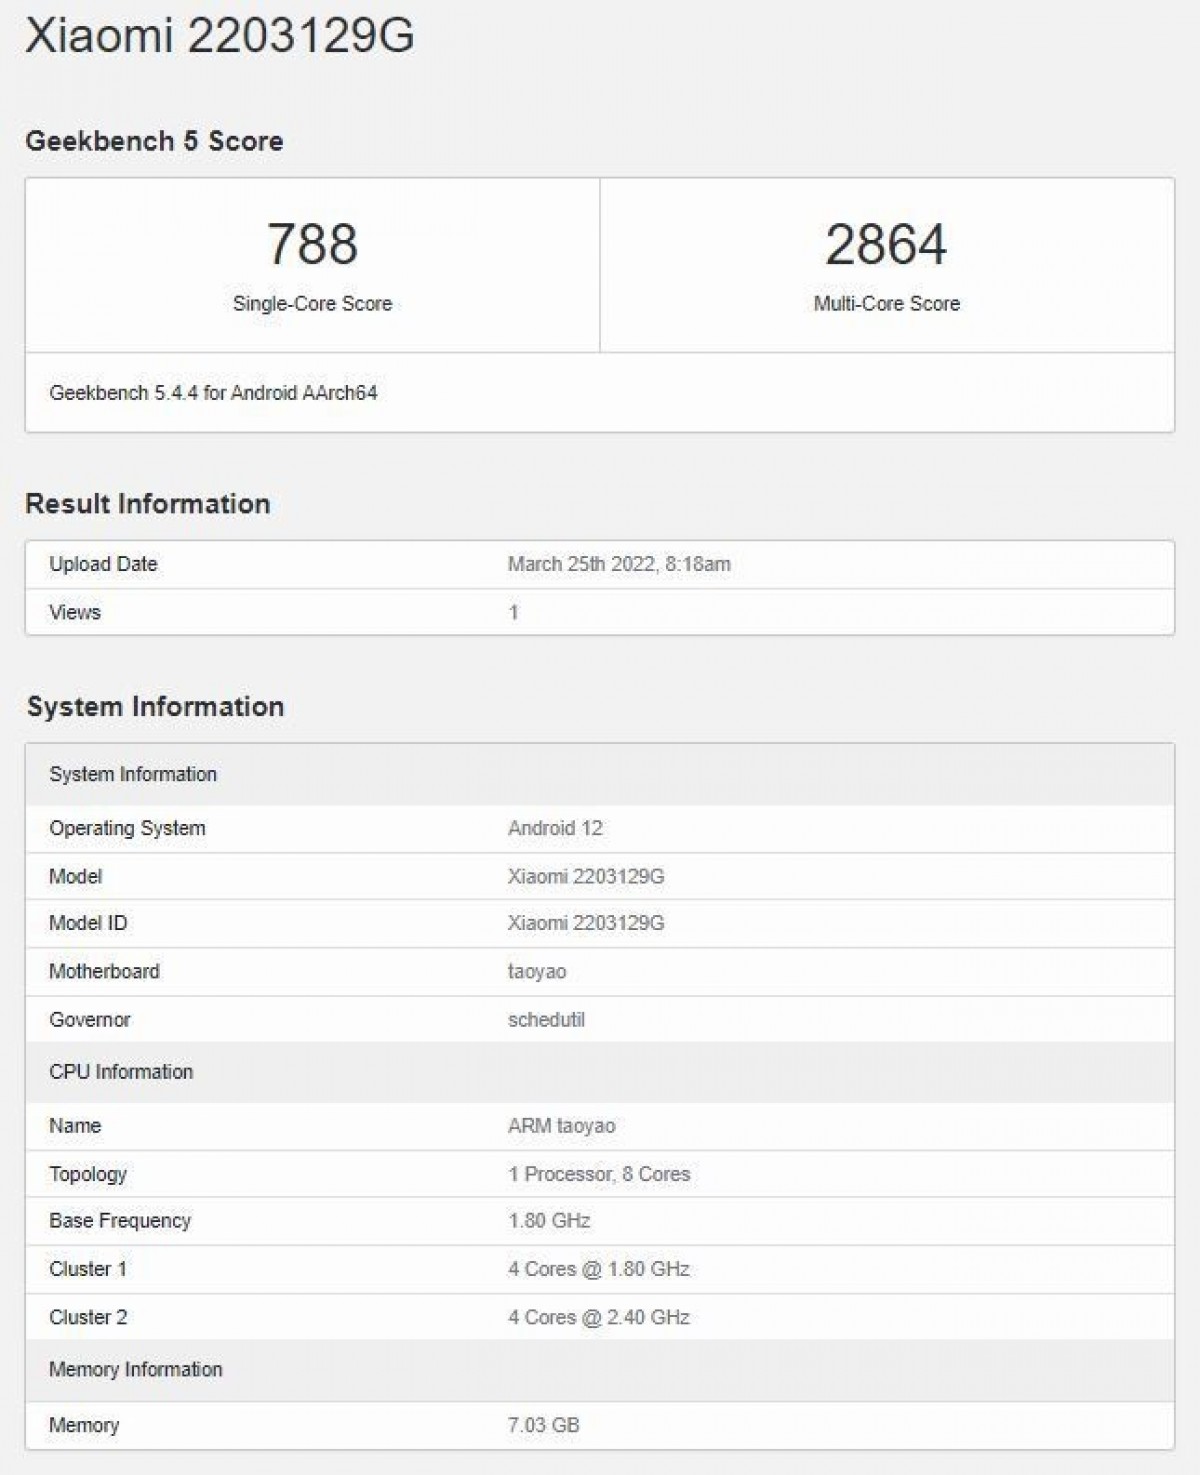 Xiaomi 12 Lite shines on Geekbench with Snapdragon 778G, 8 GB RAM